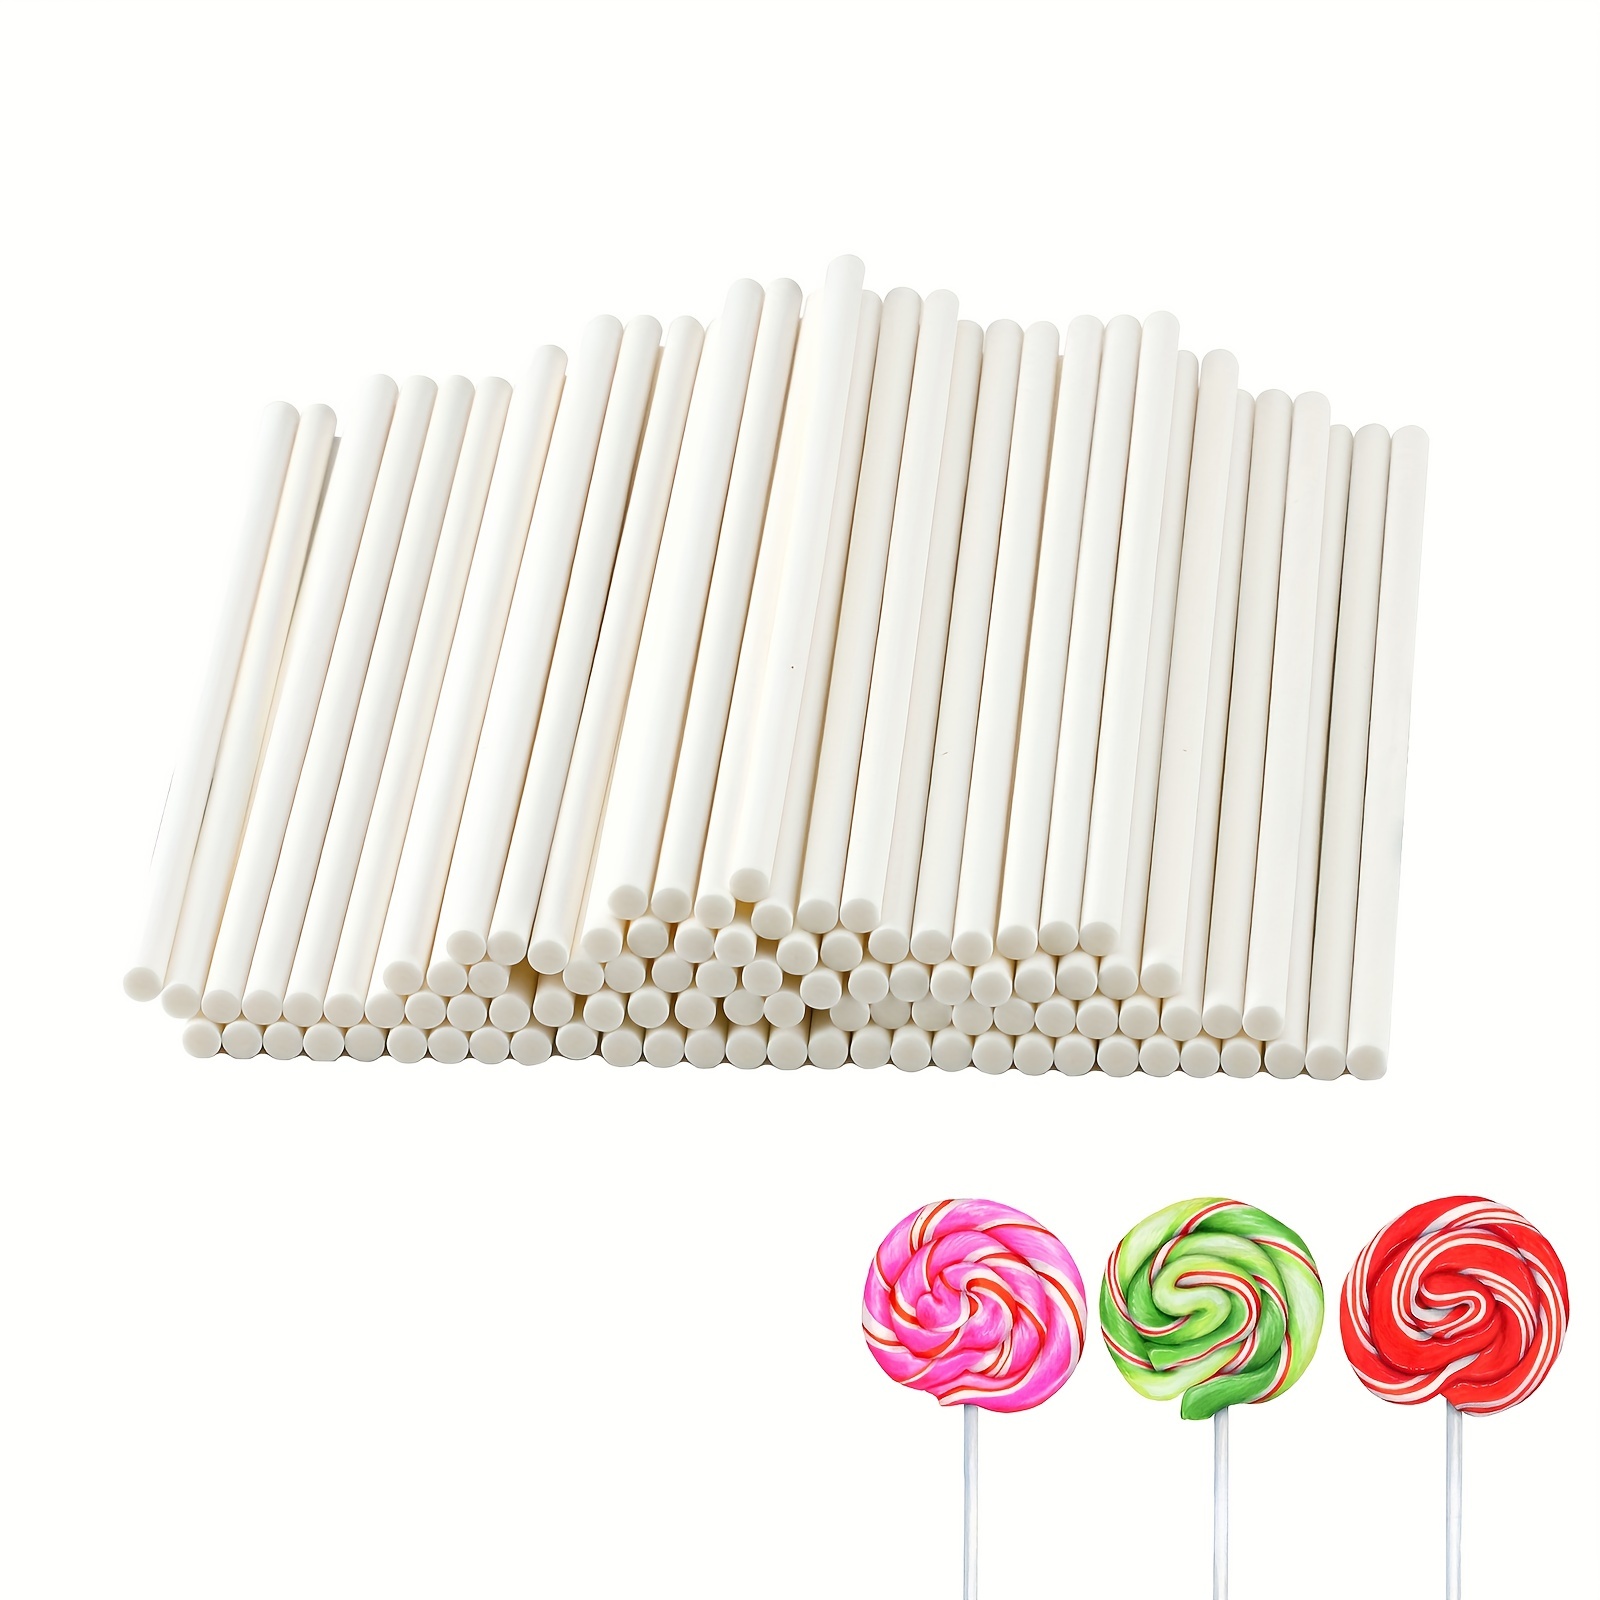 100pcs Lollipop Sticks Paper Sticks White Cake Pops Sticks For Candy,  Chocolate, Cookies (4 Inches/10cm)